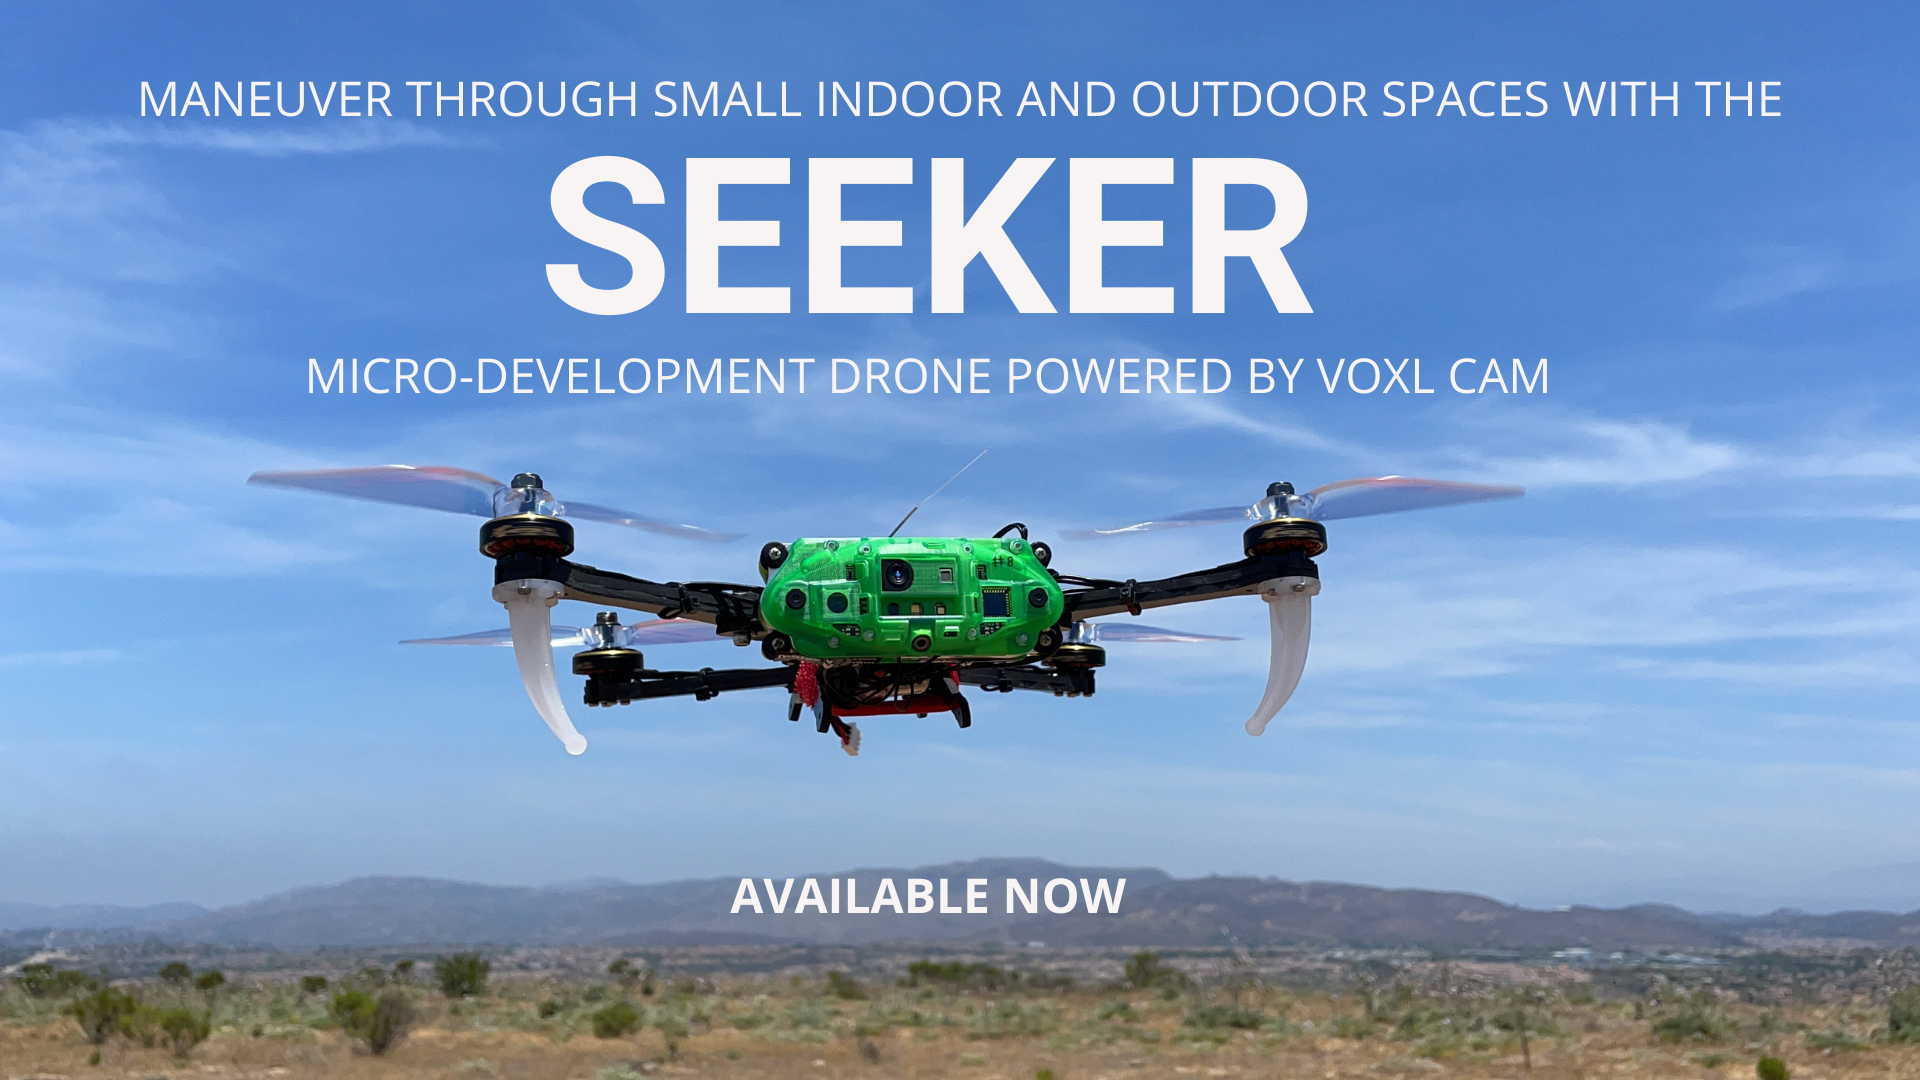 Introducing the Seeker Micro-Development Drone Powered by VOXL CAM